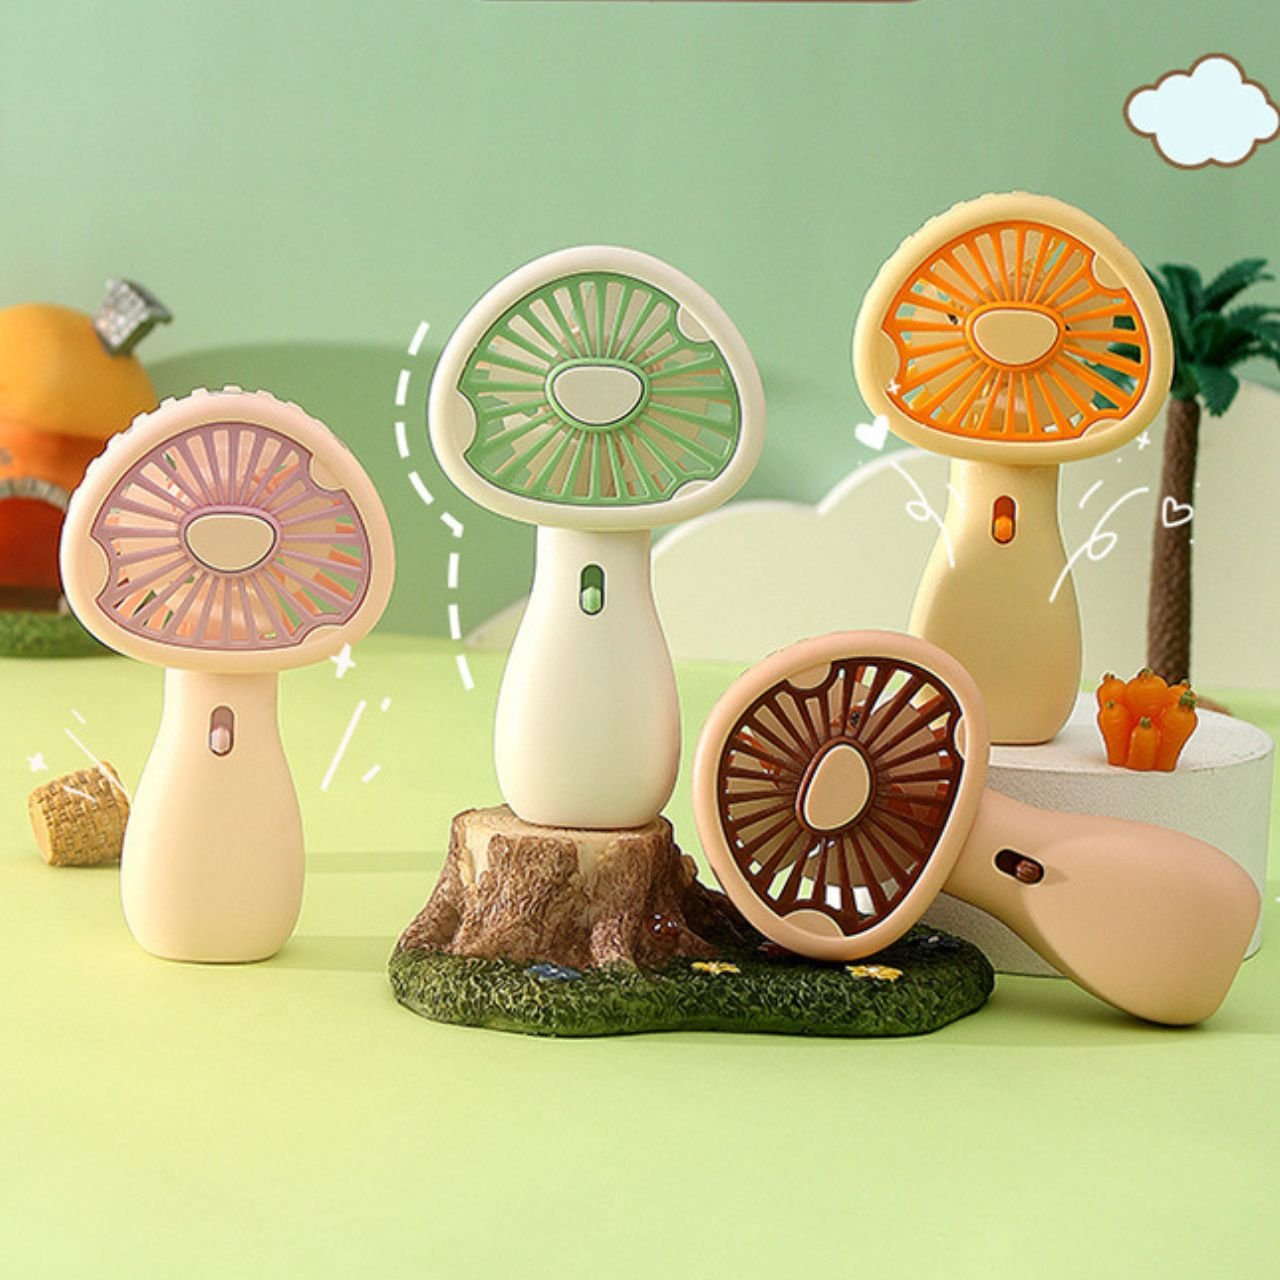 Cute Mushroom Hand Fan Different Colors on Decorative Background